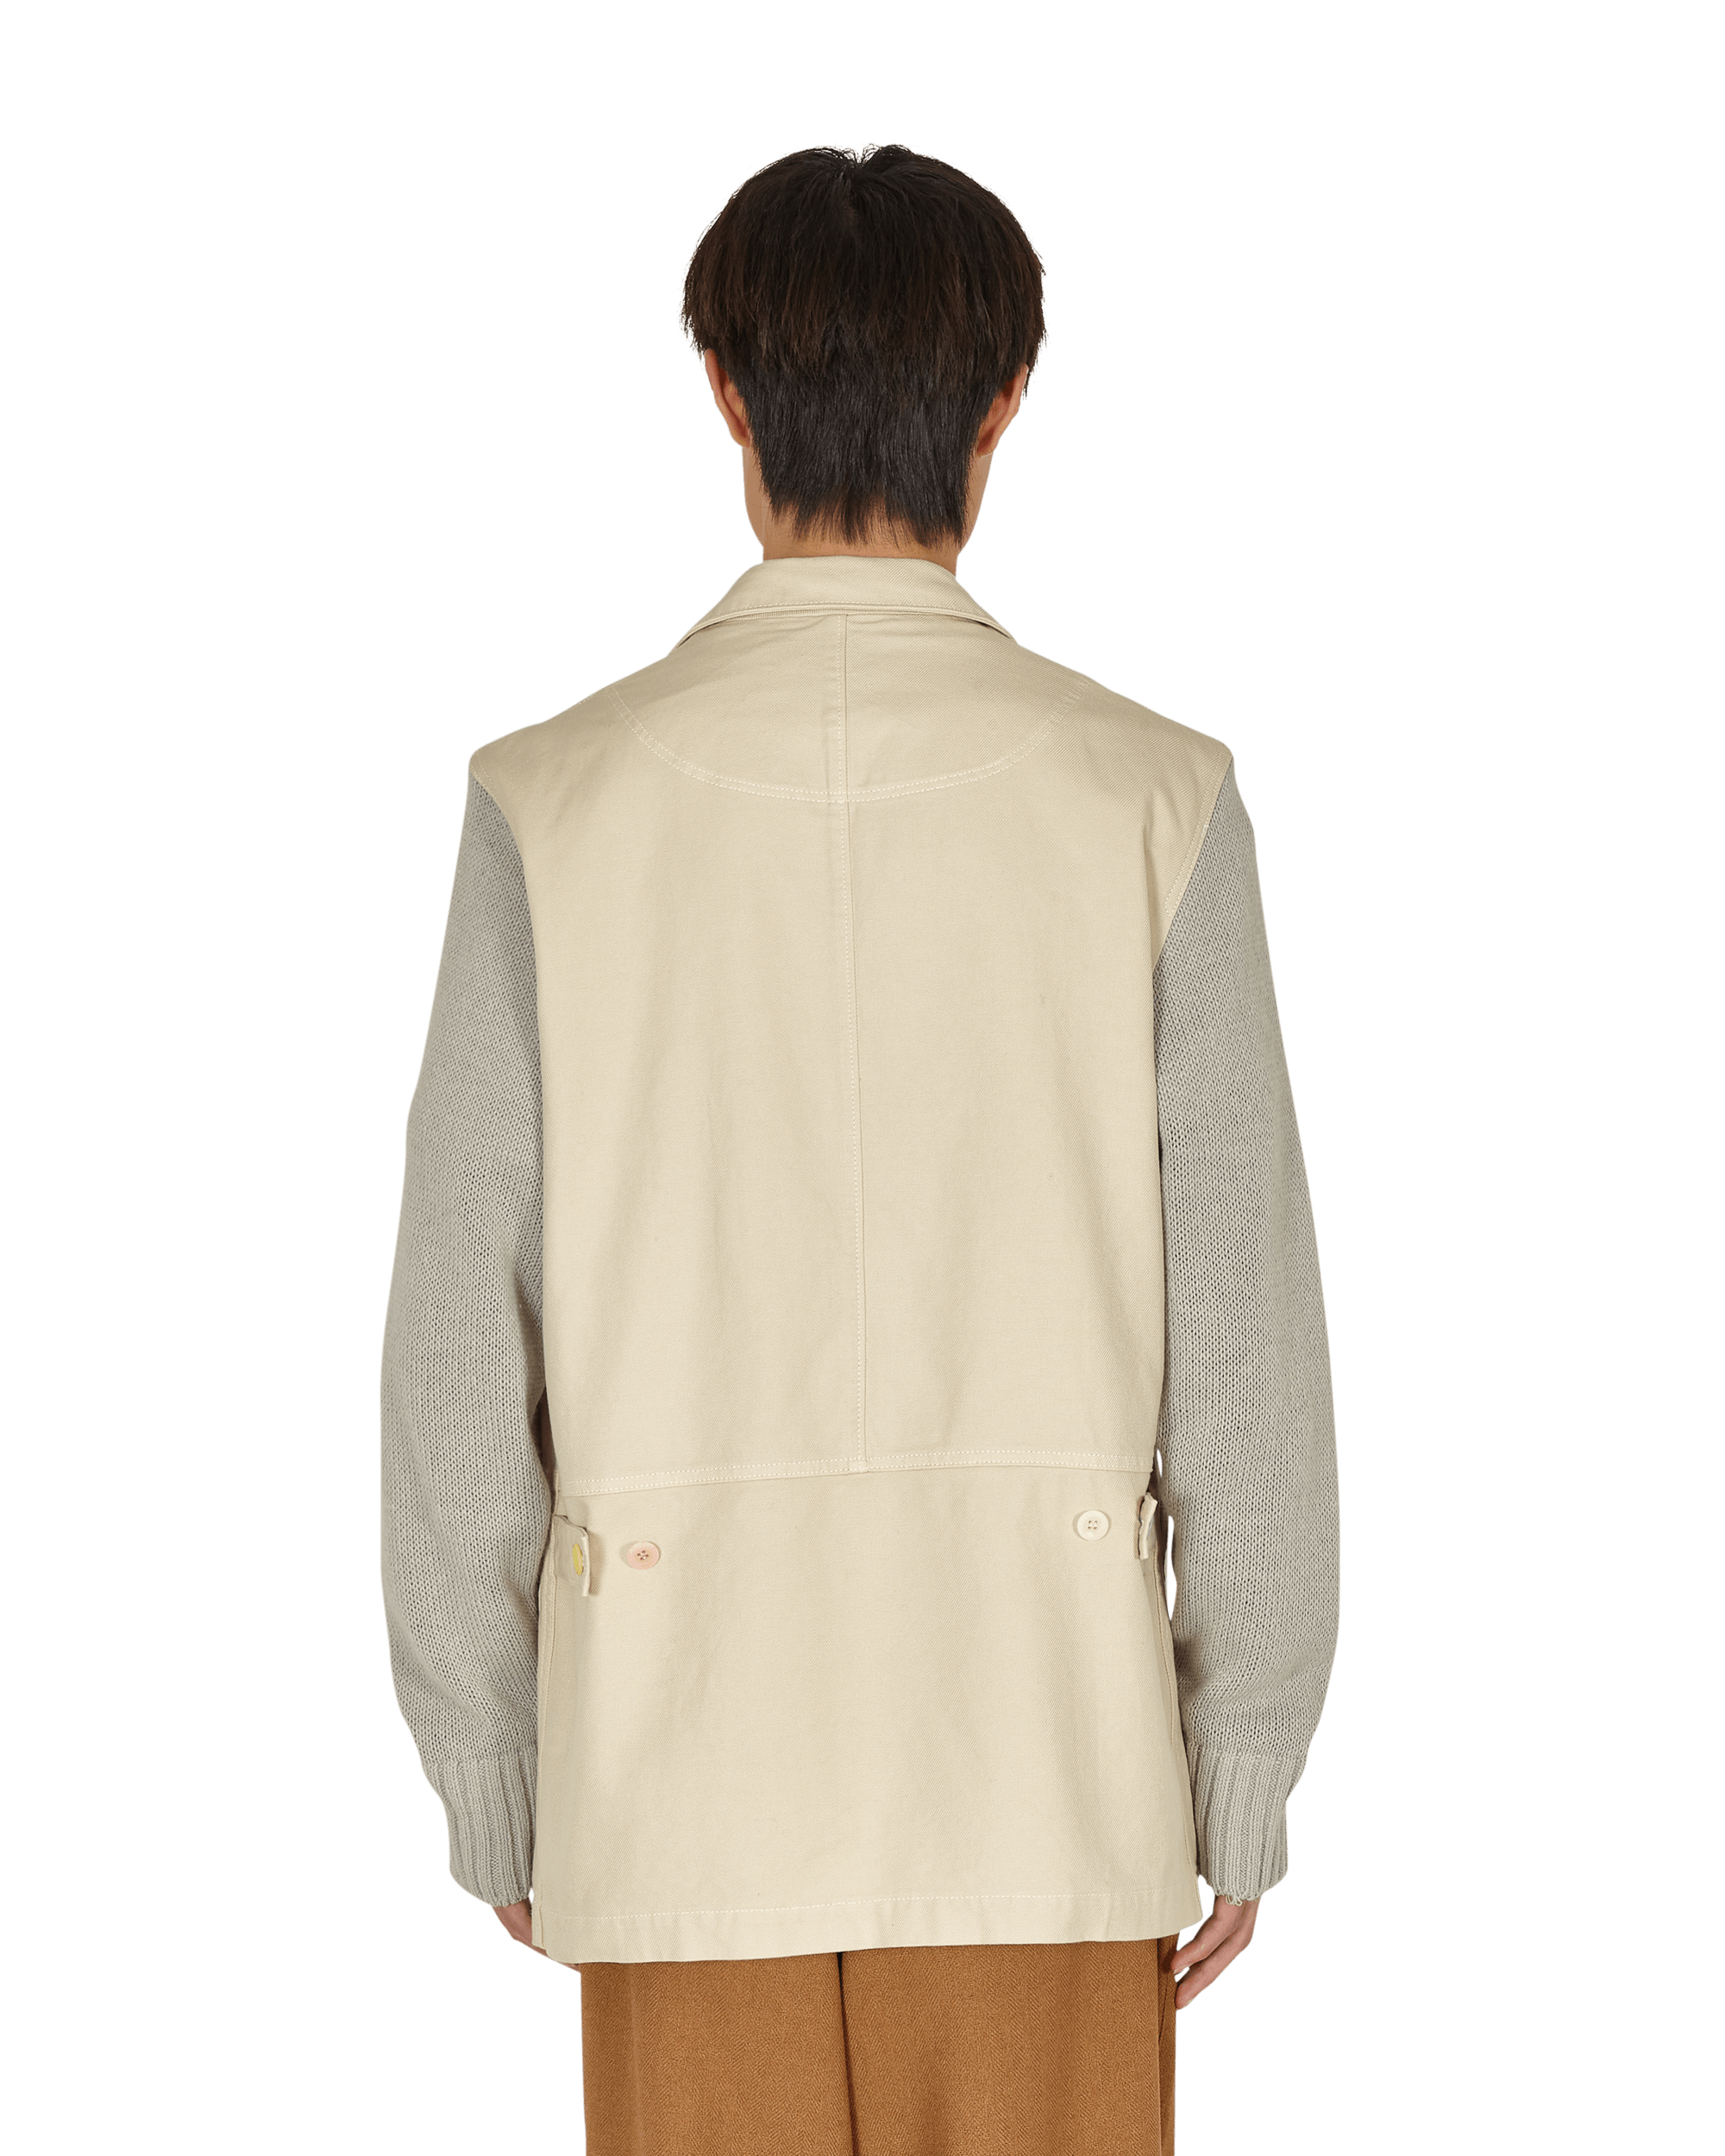 Undercover Blouson Ivory Coats and Jackets Jackets UC1A4105 IVORY